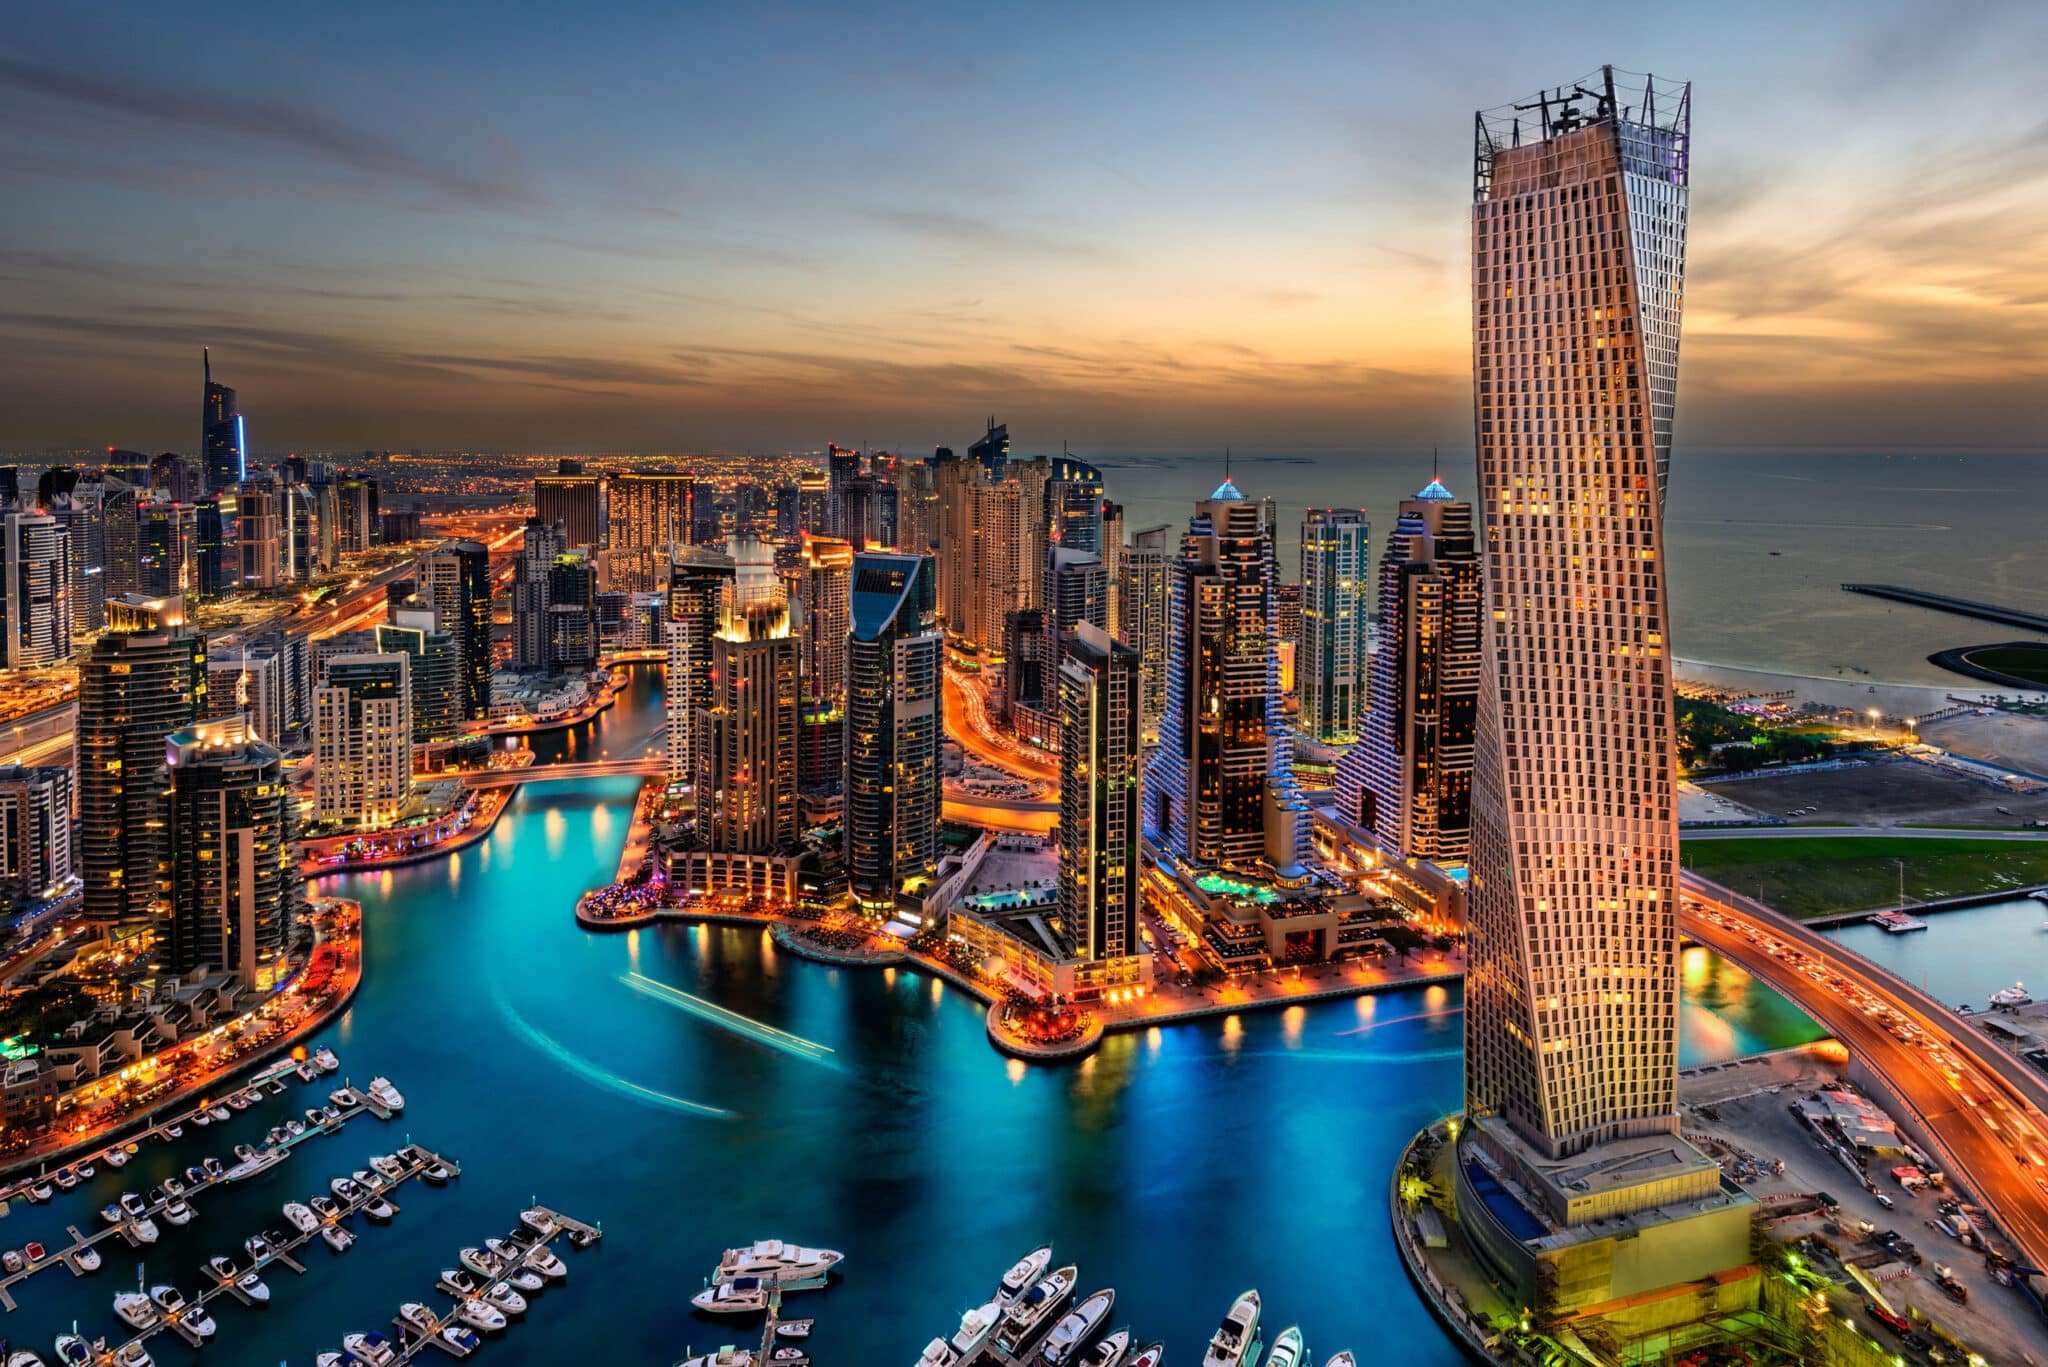 How to start a business in Dubai